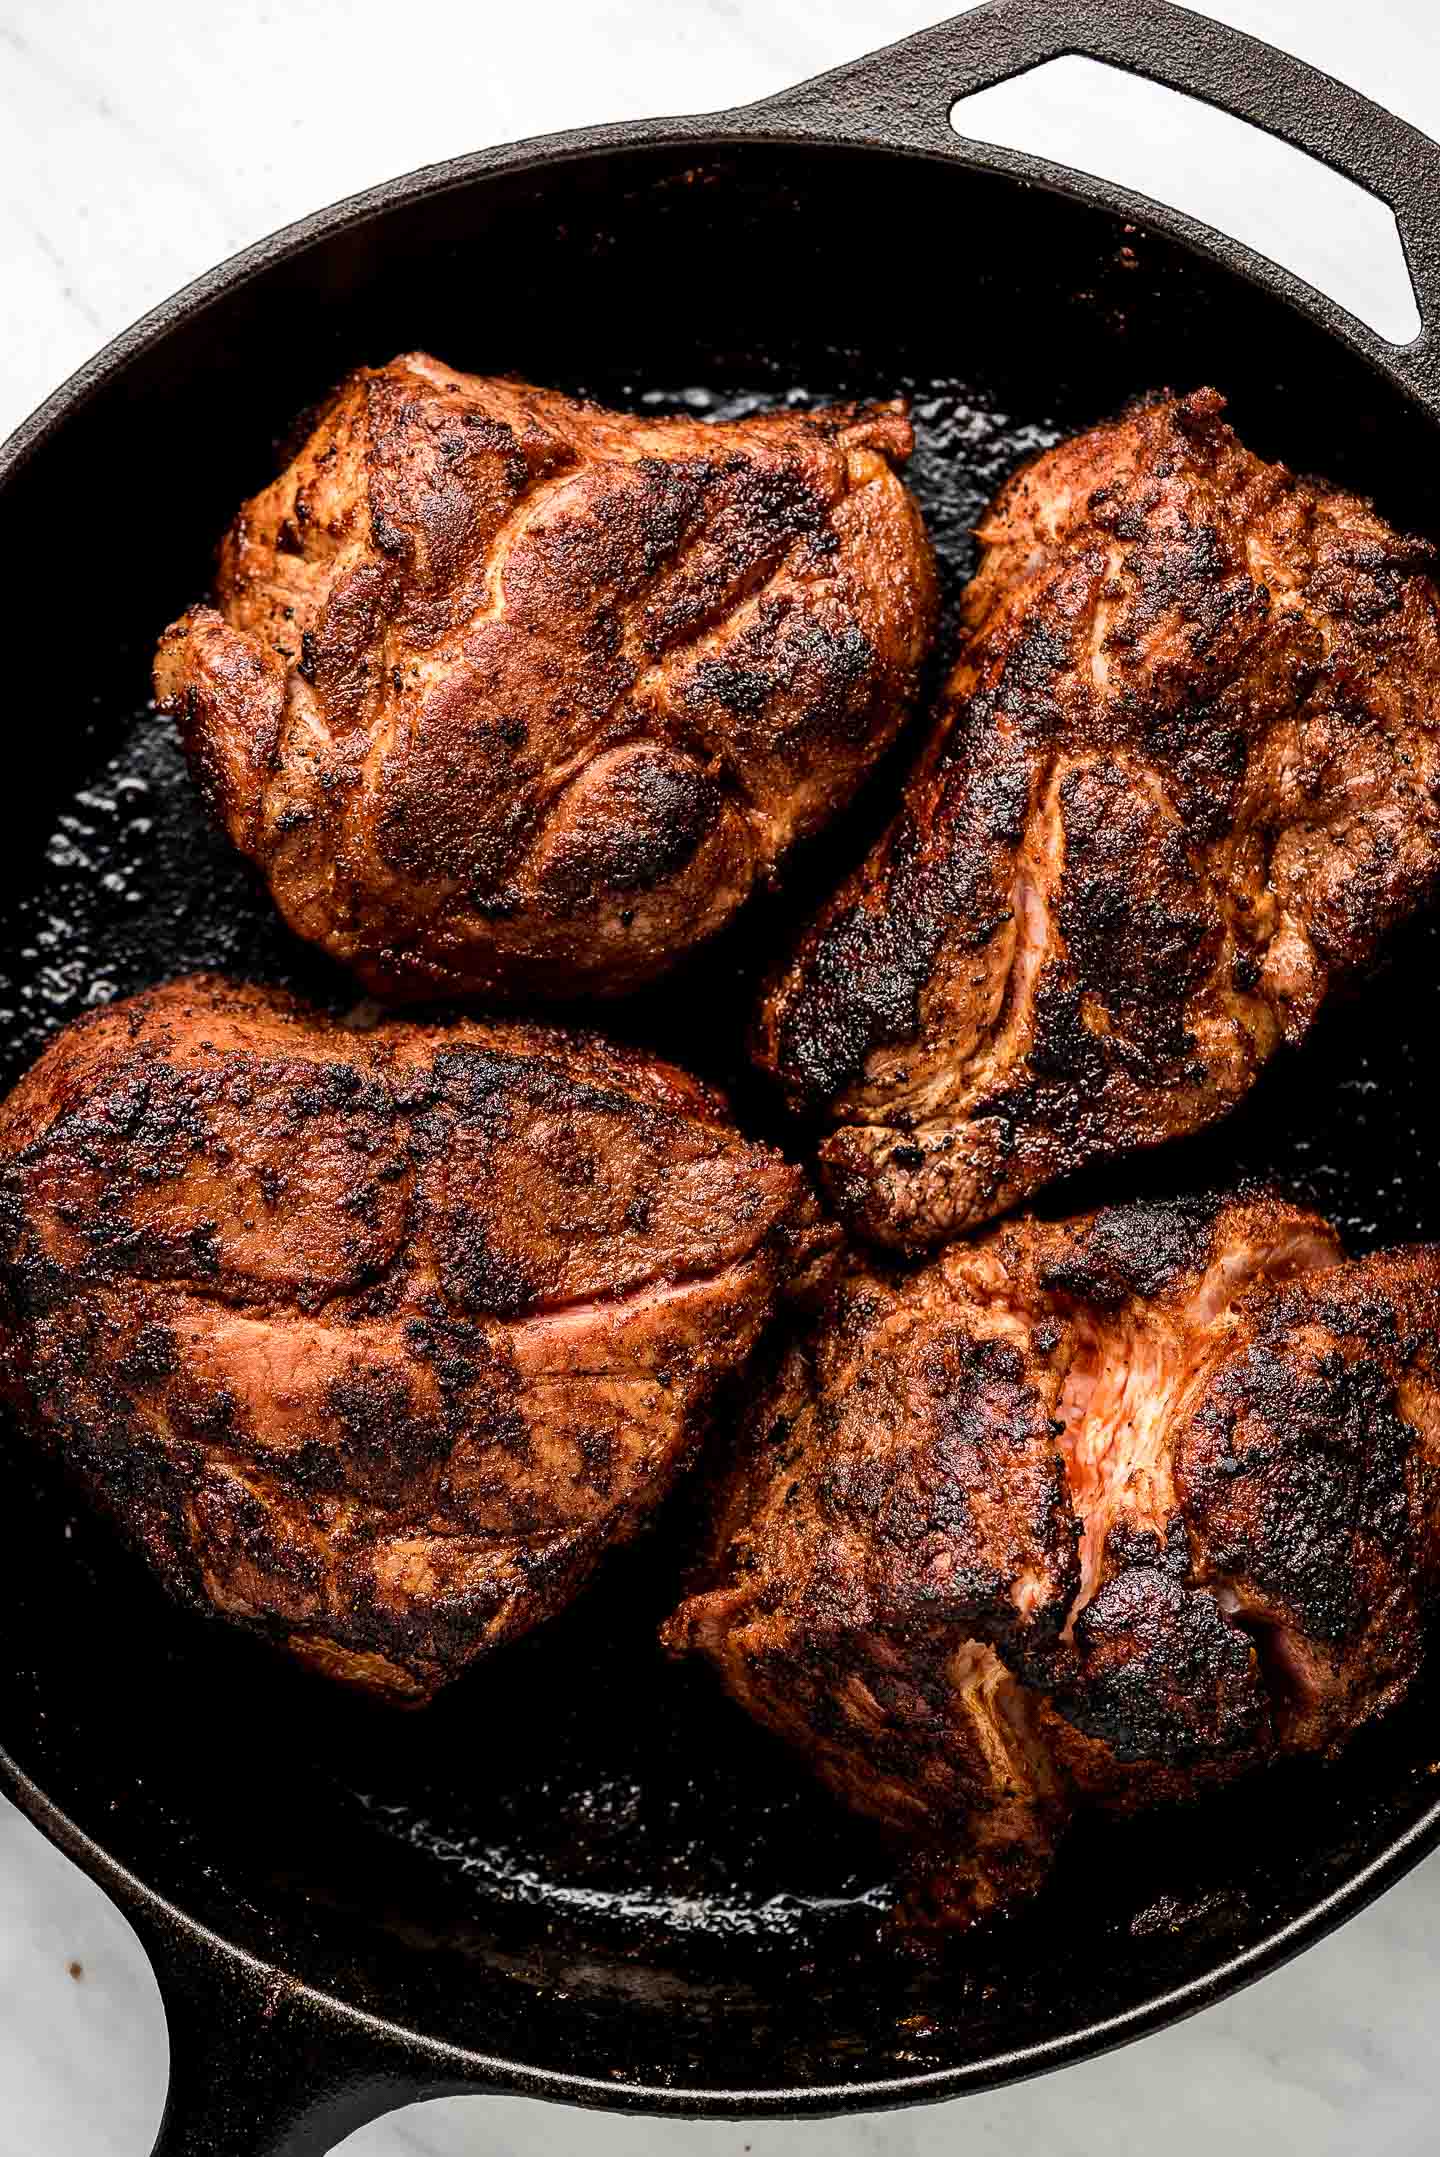 Browned cuts of pork shoulder in a a cast iron pan.